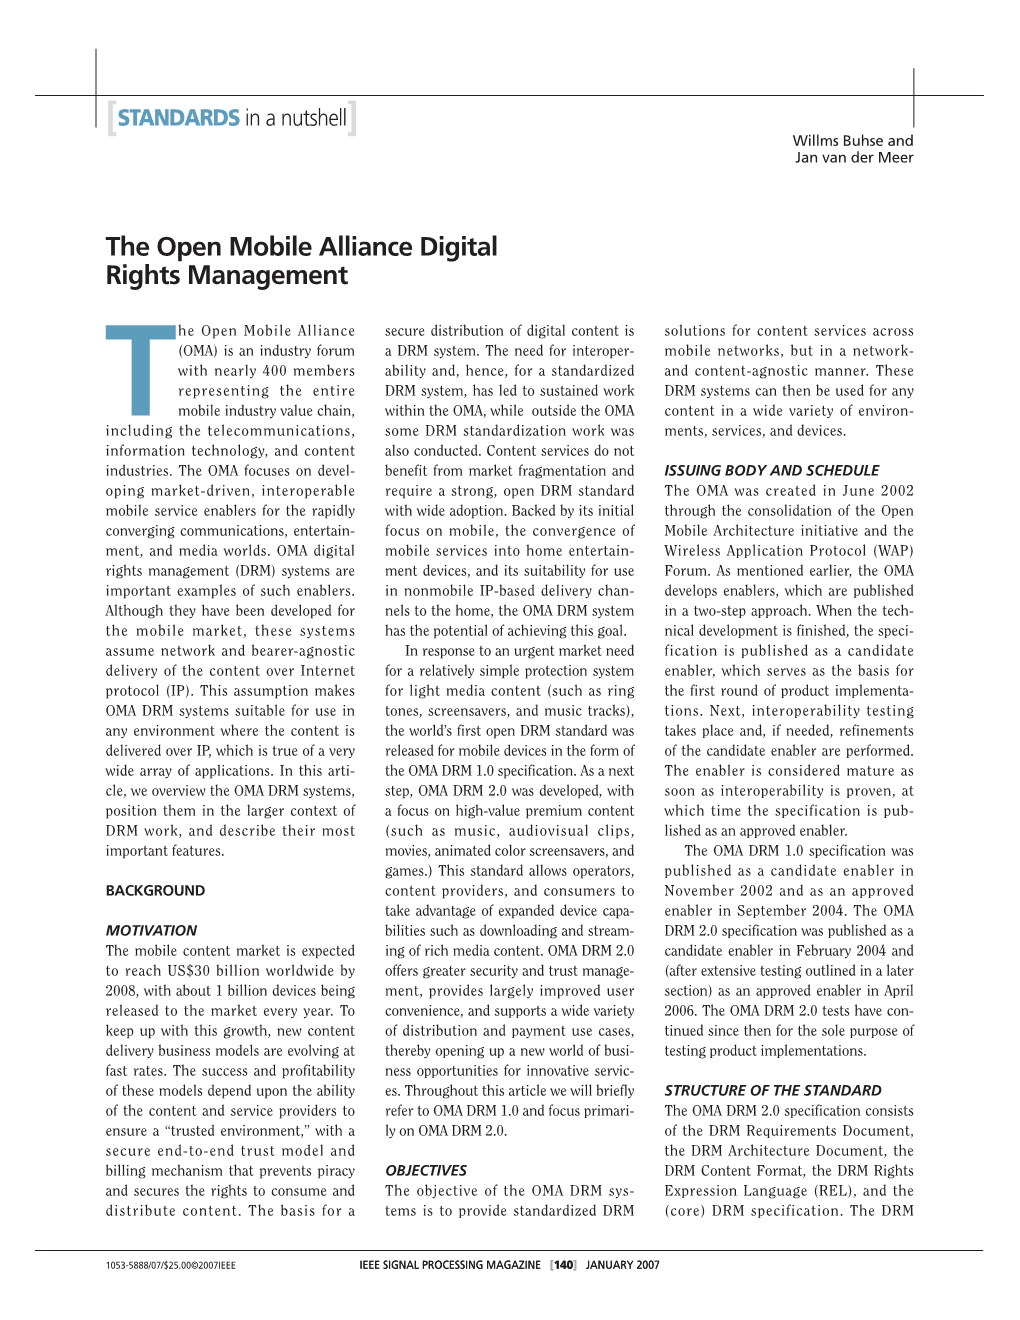 The Open Mobile Alliance Digital Rights Management